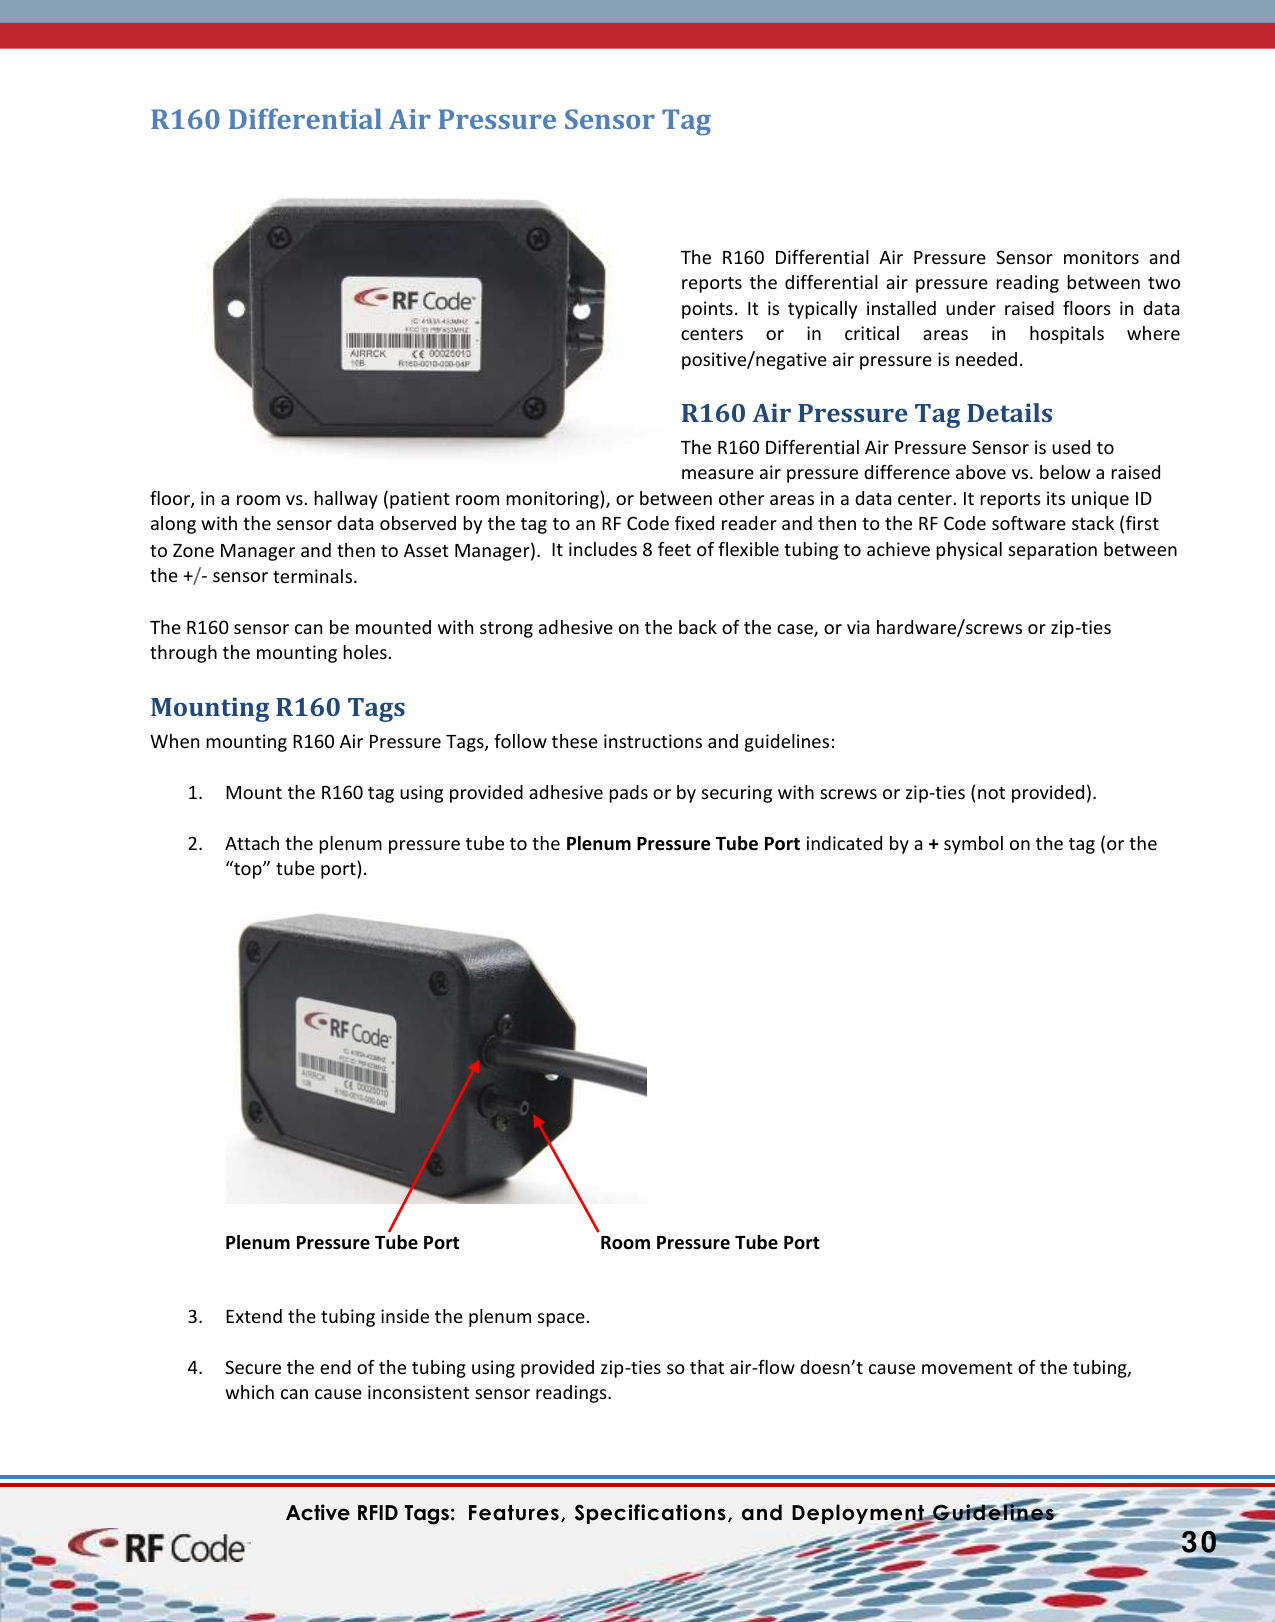    Active RFID Tags:  Features, Specifications, and Deployment Guidelines           30        R160 Differential Air Pressure Sensor Tag     The  R160  Differential  Air  Pressure  Sensor  monitors  and reports the differential air pressure  reading  between  two points.  It  is  typically  installed  under  raised  floors  in  data centers  or  in  critical  areas  in  hospitals  where positive/negative air pressure is needed. R160 Air Pressure Tag Details The R160 Differential Air Pressure Sensor is used to measure air pressure difference above vs. below a raised floor, in a room vs. hallway (patient room monitoring), or between other areas in a data center. It reports its unique ID along with the sensor data observed by the tag to an RF Code fixed reader and then to the RF Code software stack (first to Zone Manager and then to Asset Manager).  It includes 8 feet of flexible tubing to achieve physical separation between the +/- sensor terminals.  The R160 sensor can be mounted with strong adhesive on the back of the case, or via hardware/screws or zip-ties through the mounting holes. Mounting R160 Tags When mounting R160 Air Pressure Tags, follow these instructions and guidelines:  1. Mount the R160 tag using provided adhesive pads or by securing with screws or zip-ties (not provided).   2. Attach the plenum pressure tube to the Plenum Pressure Tube Port indicated by a + symbol on the tag (or the “top” tube port).    Plenum Pressure Tube Port    Room Pressure Tube Port   3. Extend the tubing inside the plenum space.   4. Secure the end of the tubing using provided zip-ties so that air-flow doesn’t cause movement of the tubing, which can cause inconsistent sensor readings. 